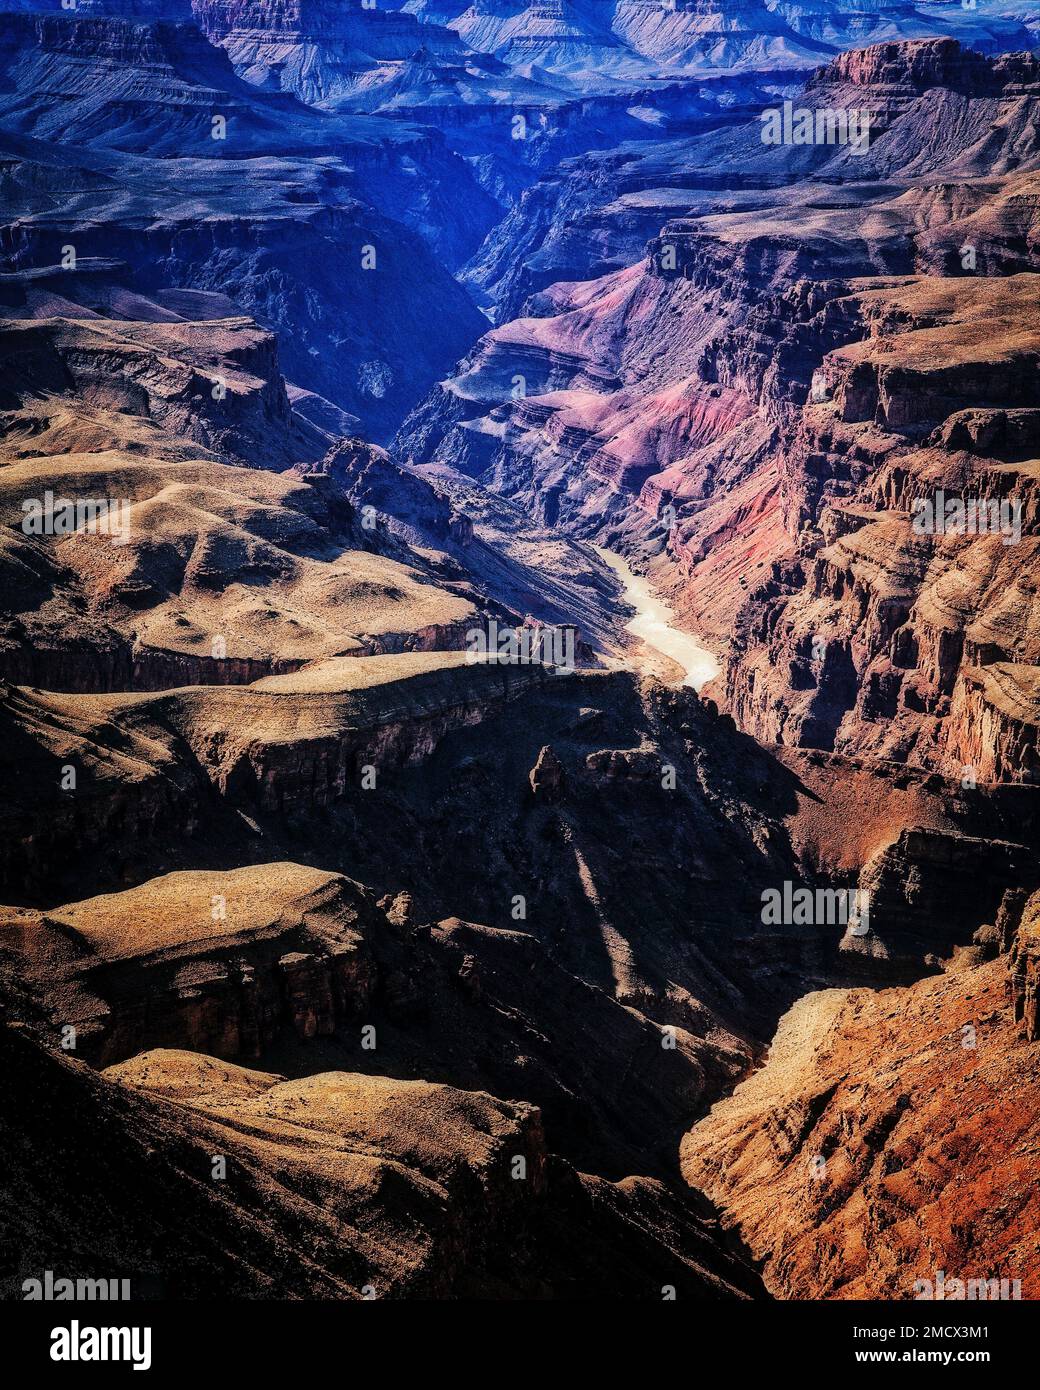 Almost a mile below the rim the Colorado River carves through the Grand Canyon in Arizona. Stock Photo